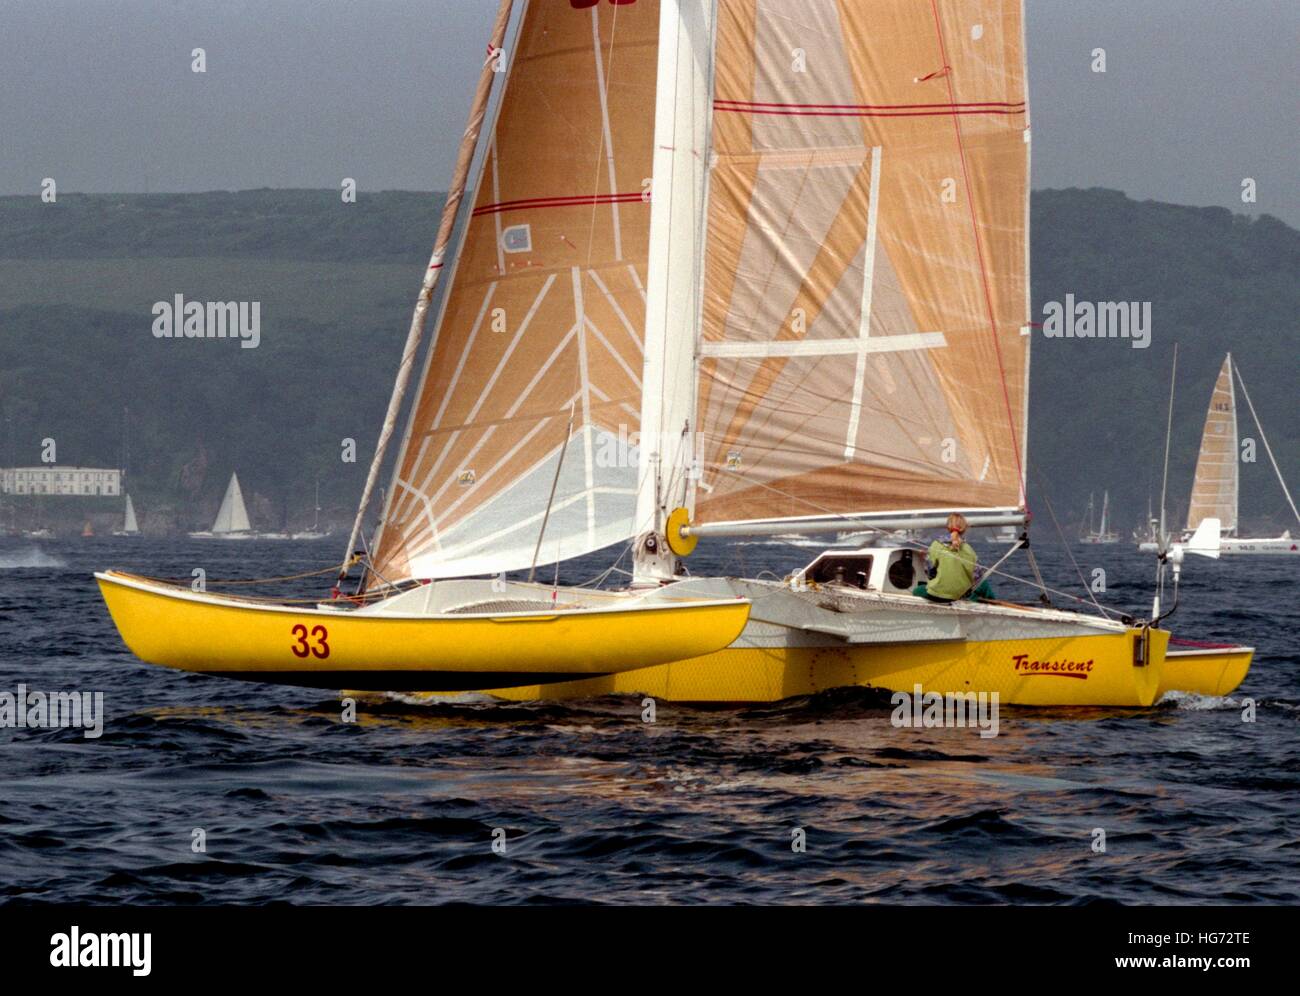 AJAXNETPHOTO. 7TH JUNE, 1992. PLYMOUTH, ENGLAND. - EUROPE 1 STAR - SINGLE HANDED TRANSATLANTIC RACE - BRITISH SKIPPER BRIAN THOMPSON SAILED THE 35FT CLASS V TRIMARAN TRANSIENT TO FIRST PLACE IN CLASS AT THE FINISH.   PHOTO:JONATHAN EASTLAND/AJAX REF:920706 6 14A Stock Photo